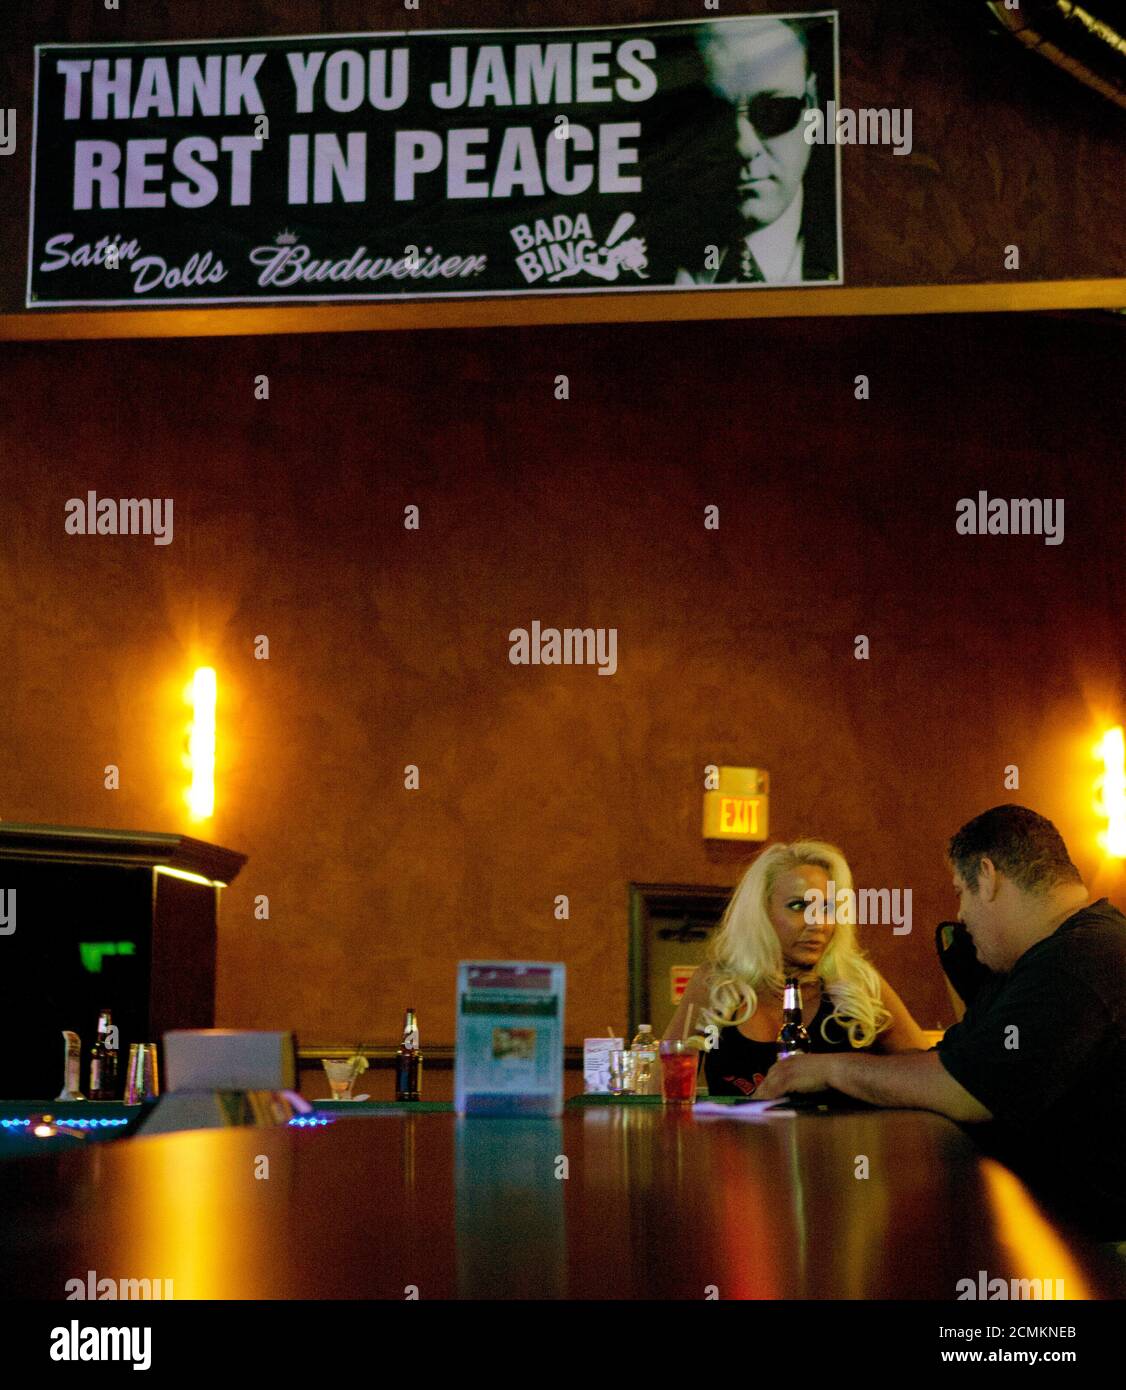 An employee and a customer talk at the bar under a sign at Satin Dolls,  which stood in as the Bada Bing Club filmed in the TV show "The Sopranos",  in Lodi,